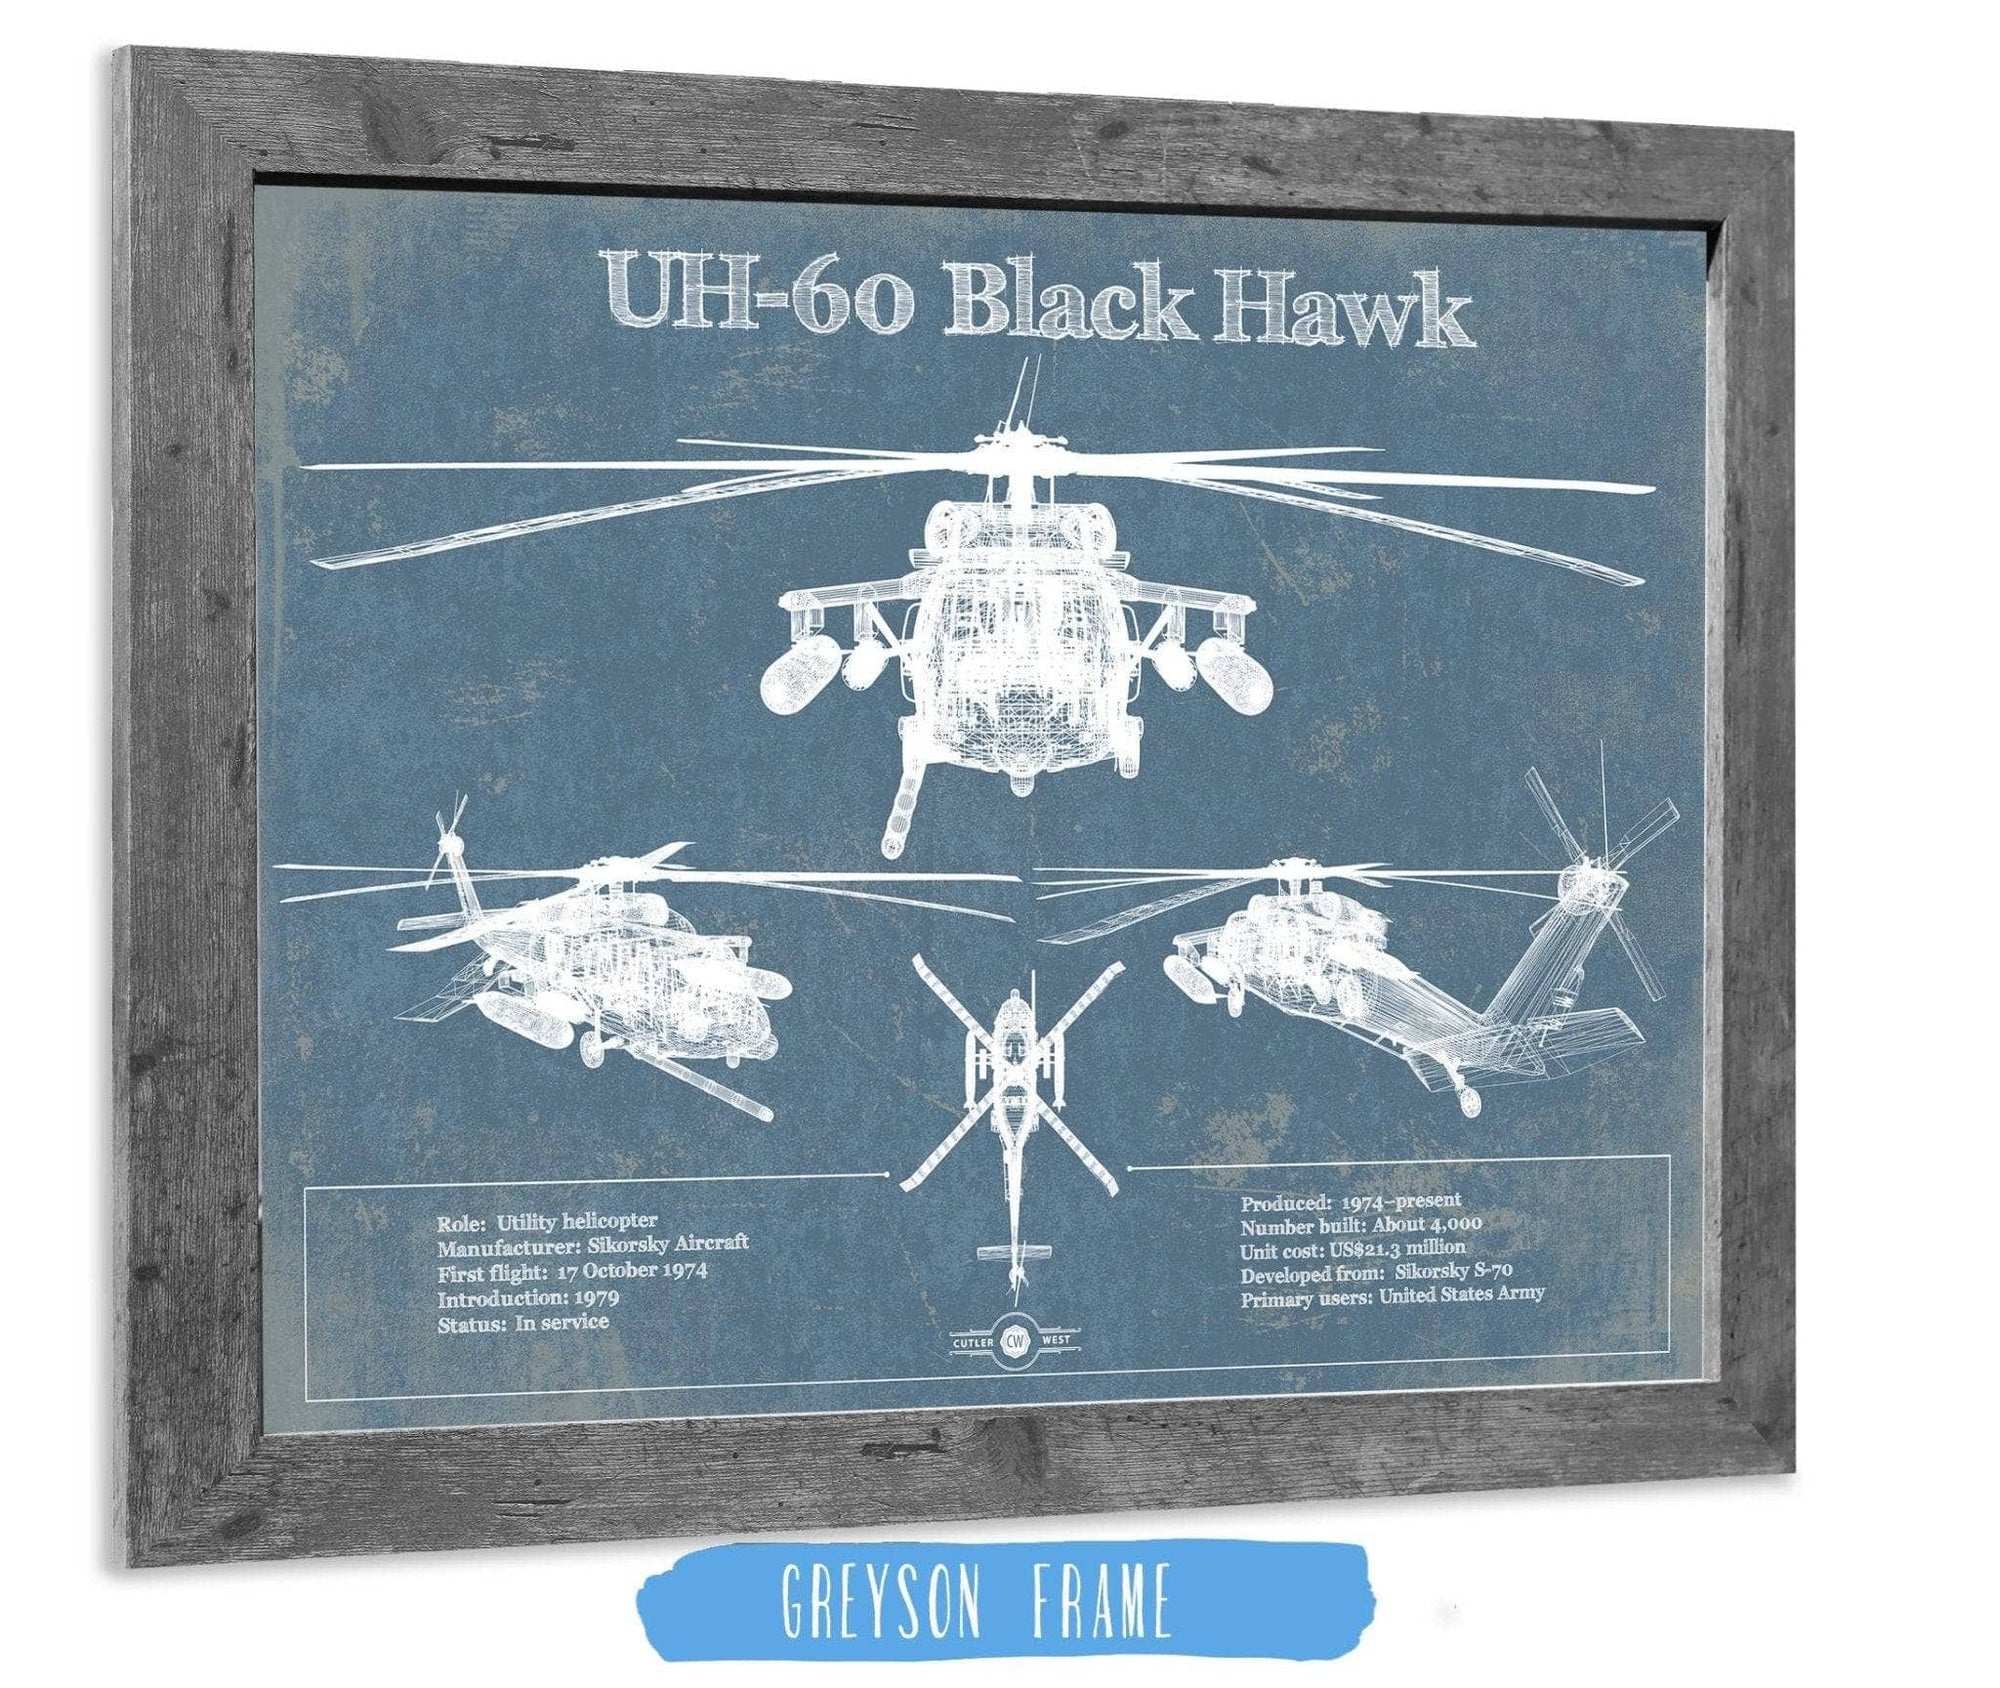 Cutler West Military Aircraft 14" x 11" / Greyson Frame UH-60 Blackhawk Helicopter Vintage Aviation Blueprint Military Print 783513666-TOP